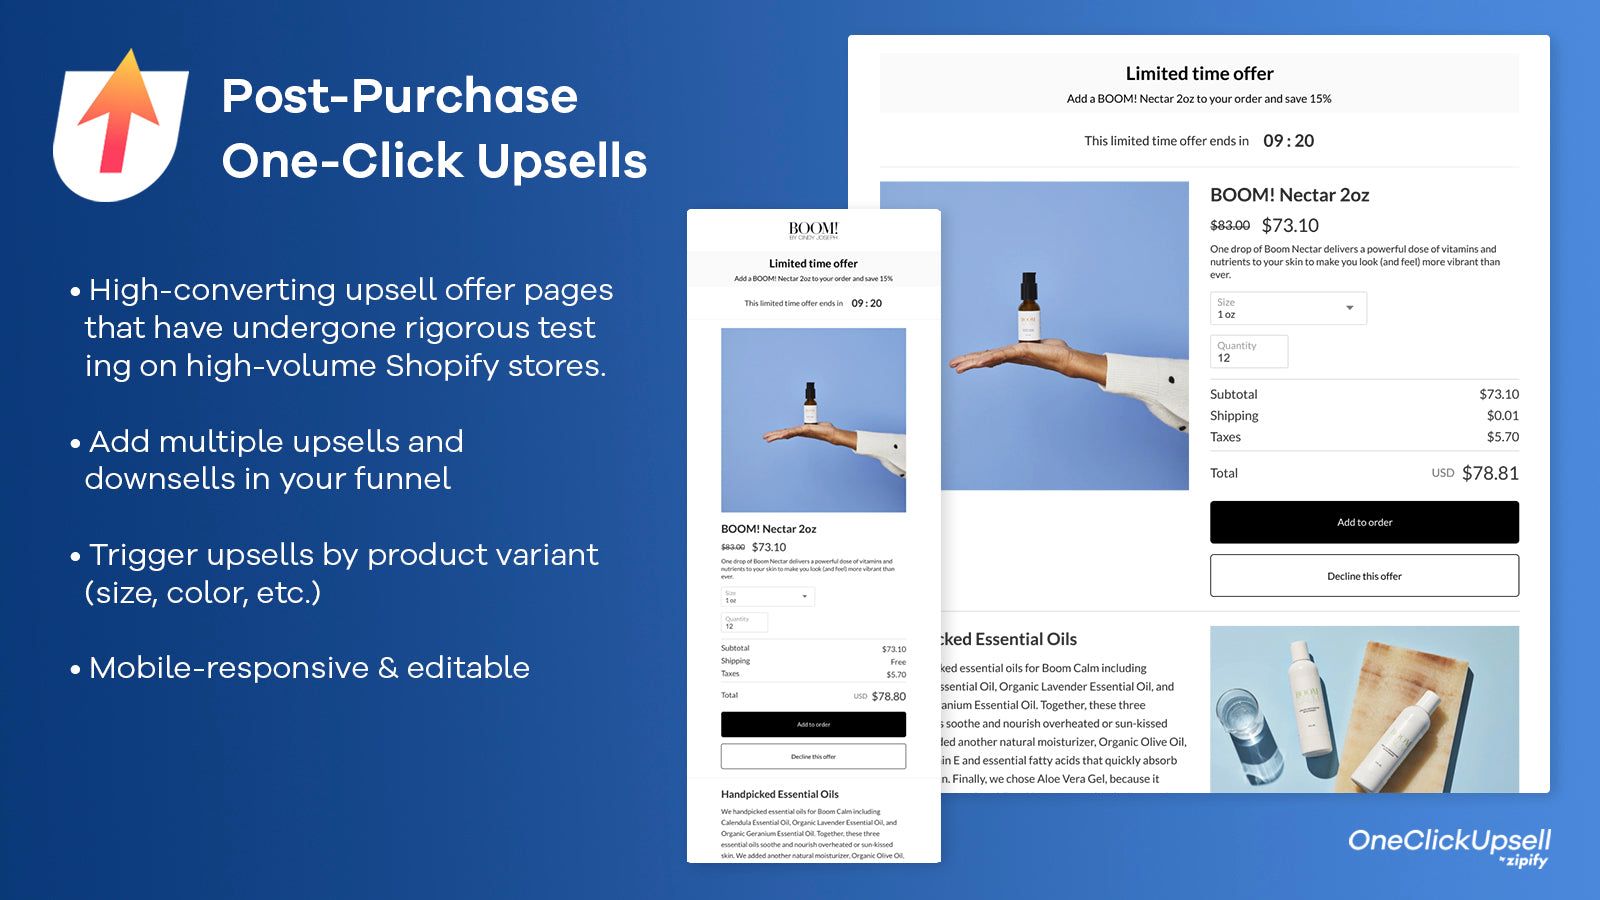 Post-Purchase One-Click Upsells